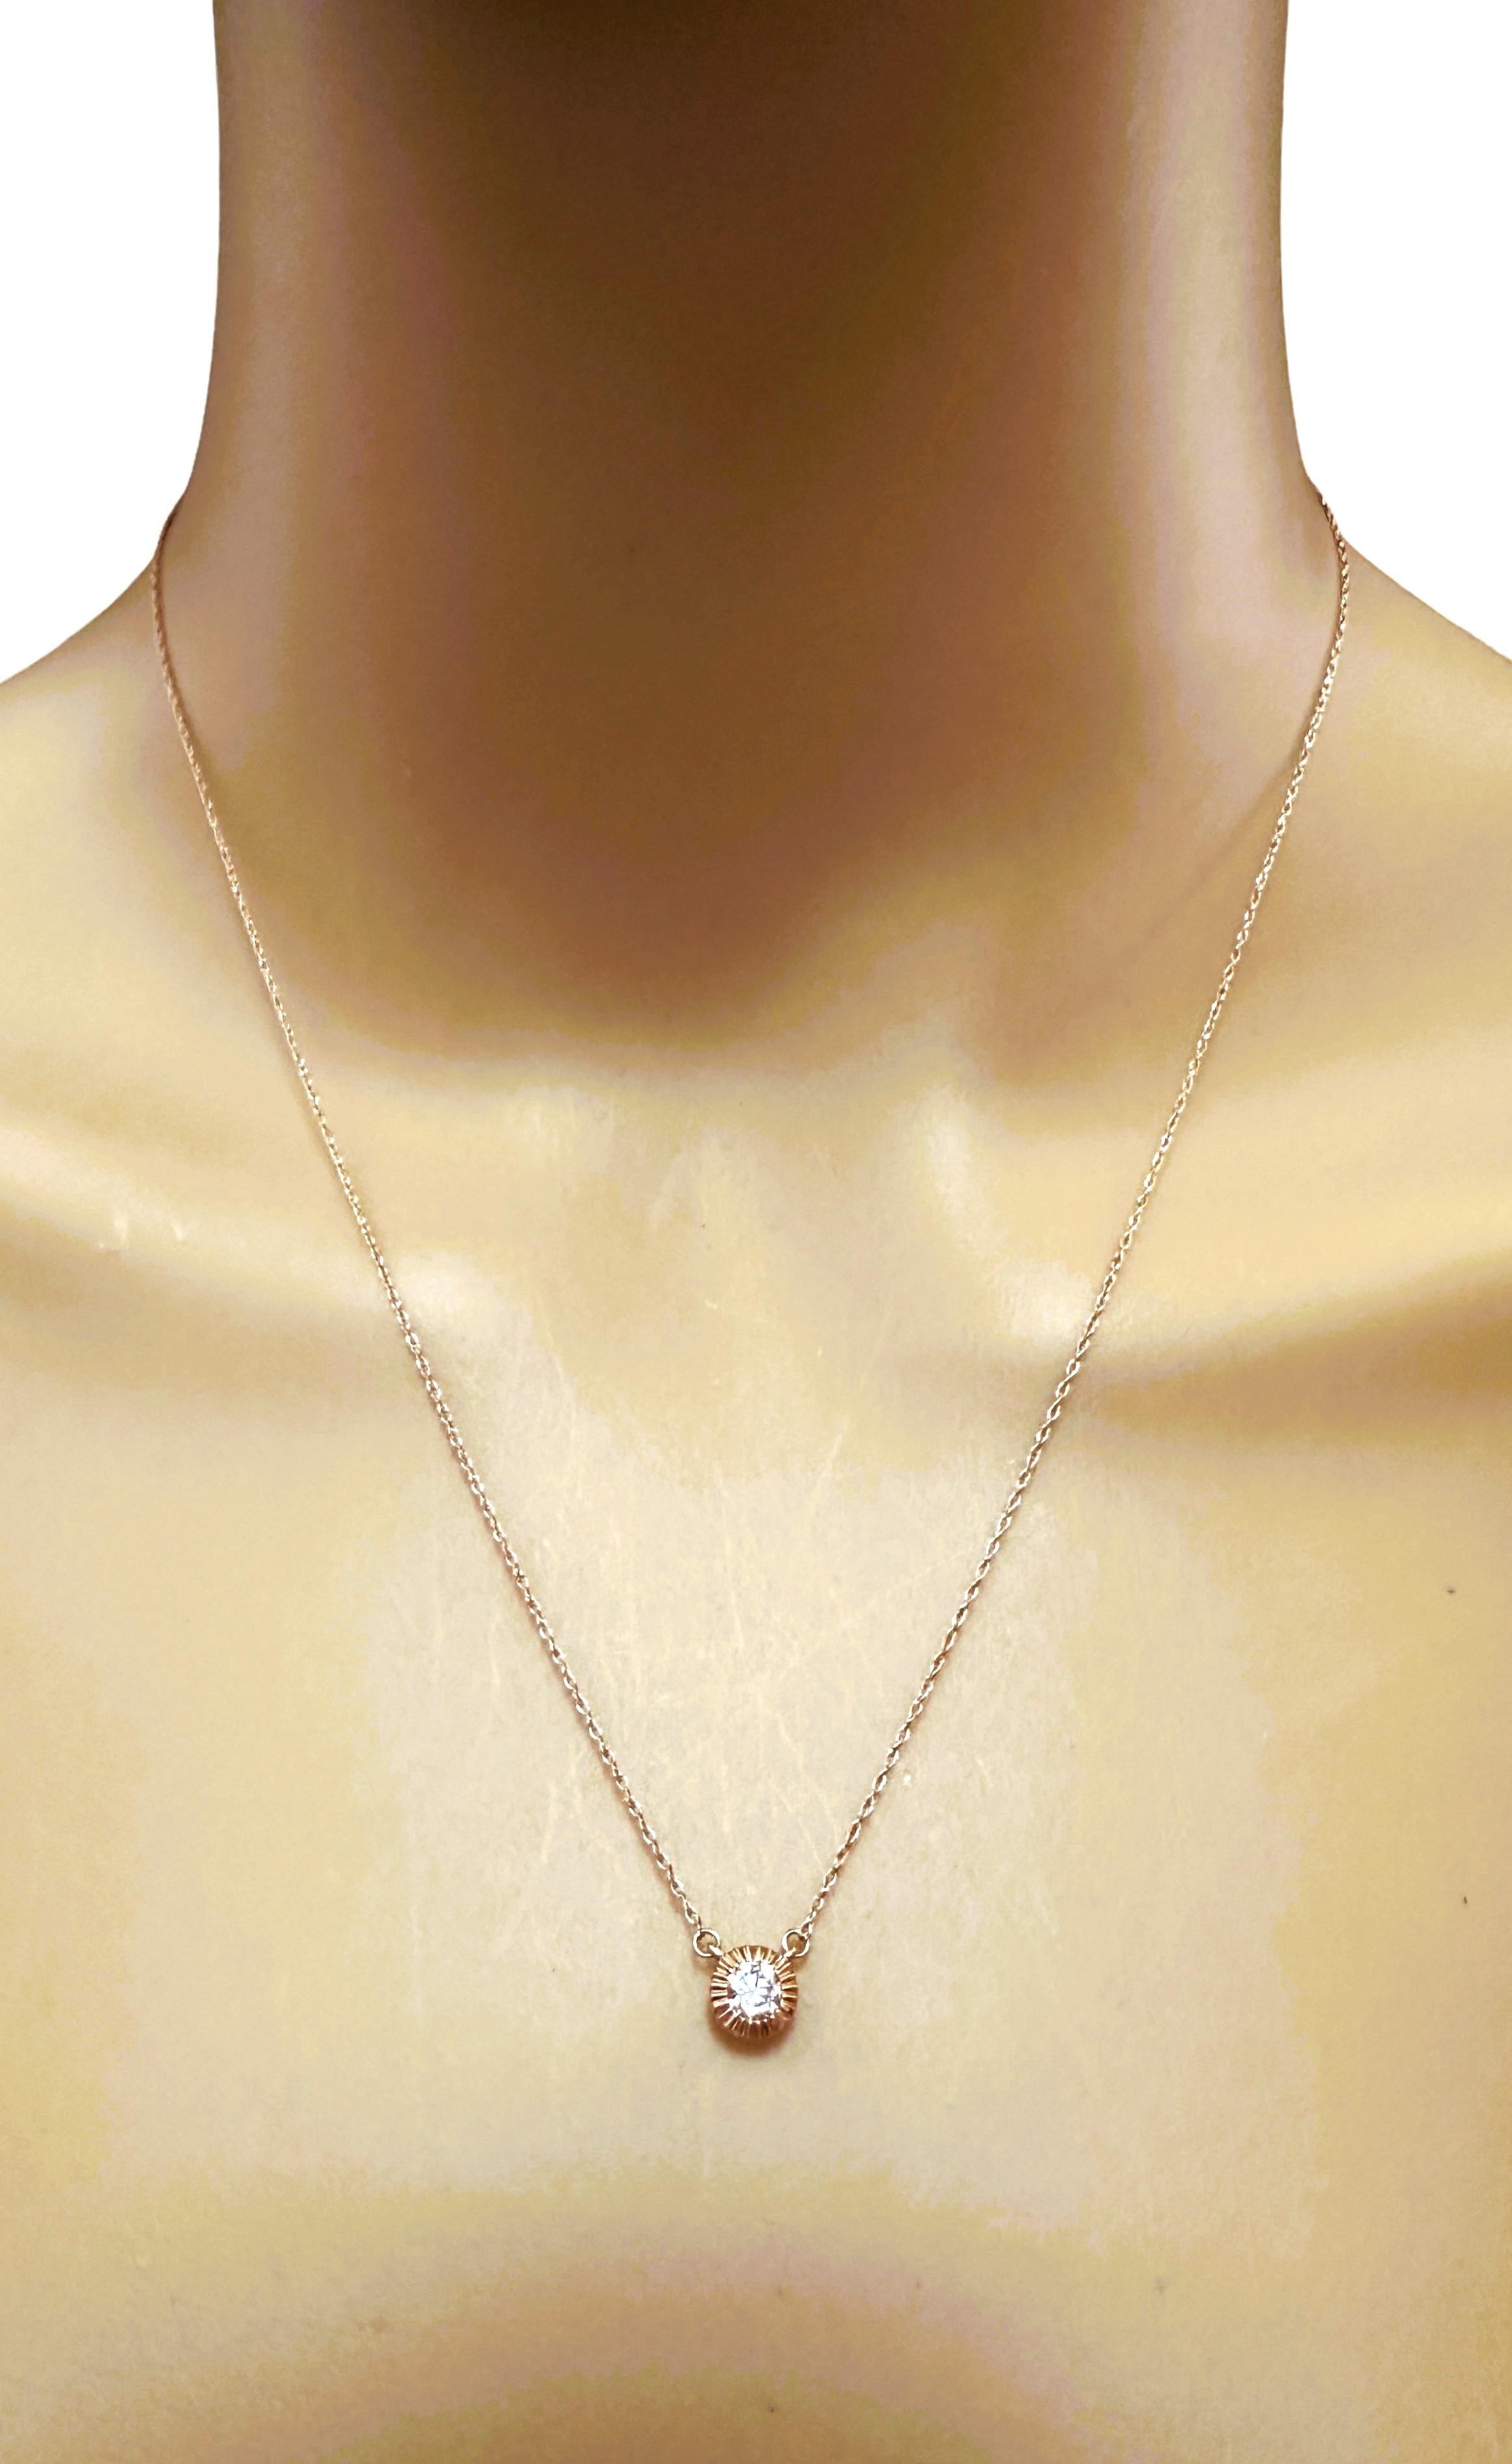 Art Deco New 14k Rose Gold Diamond Pendant Necklace With Matching Earrings For Sale